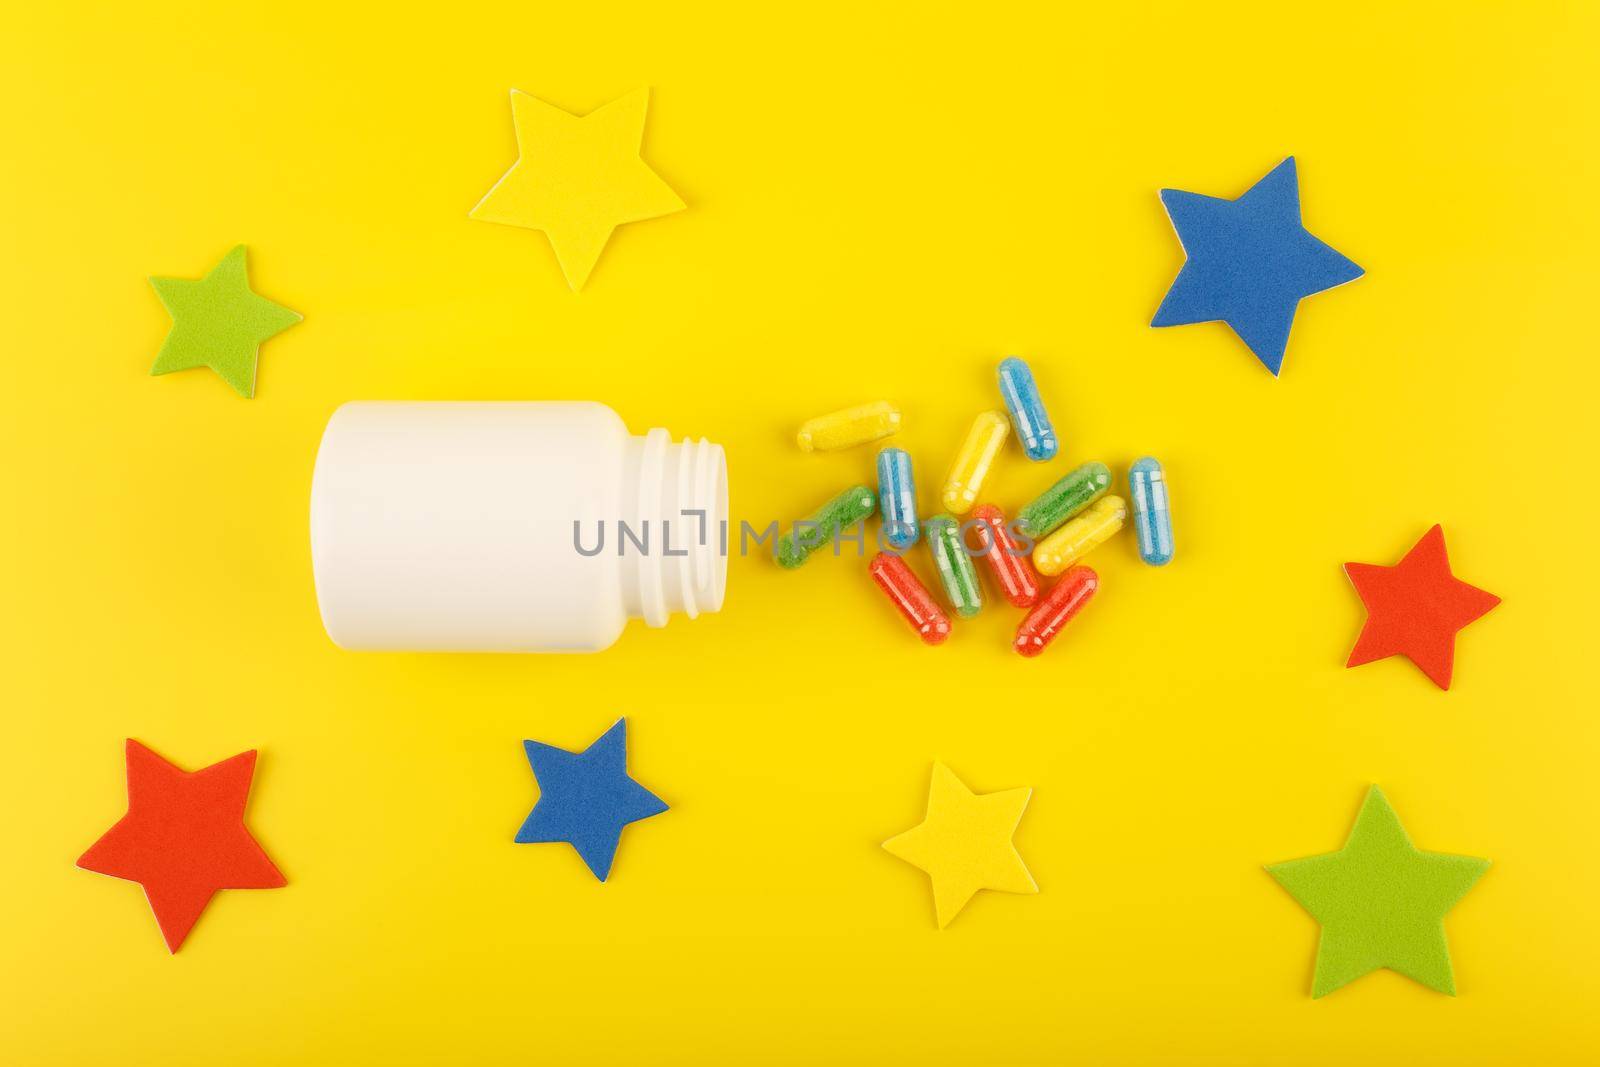 Flat lay with medication bottle with spilled multicolored pills on yellow background decorated with stars.Concept of wellness, healthy lifestyle or vitamins for kids